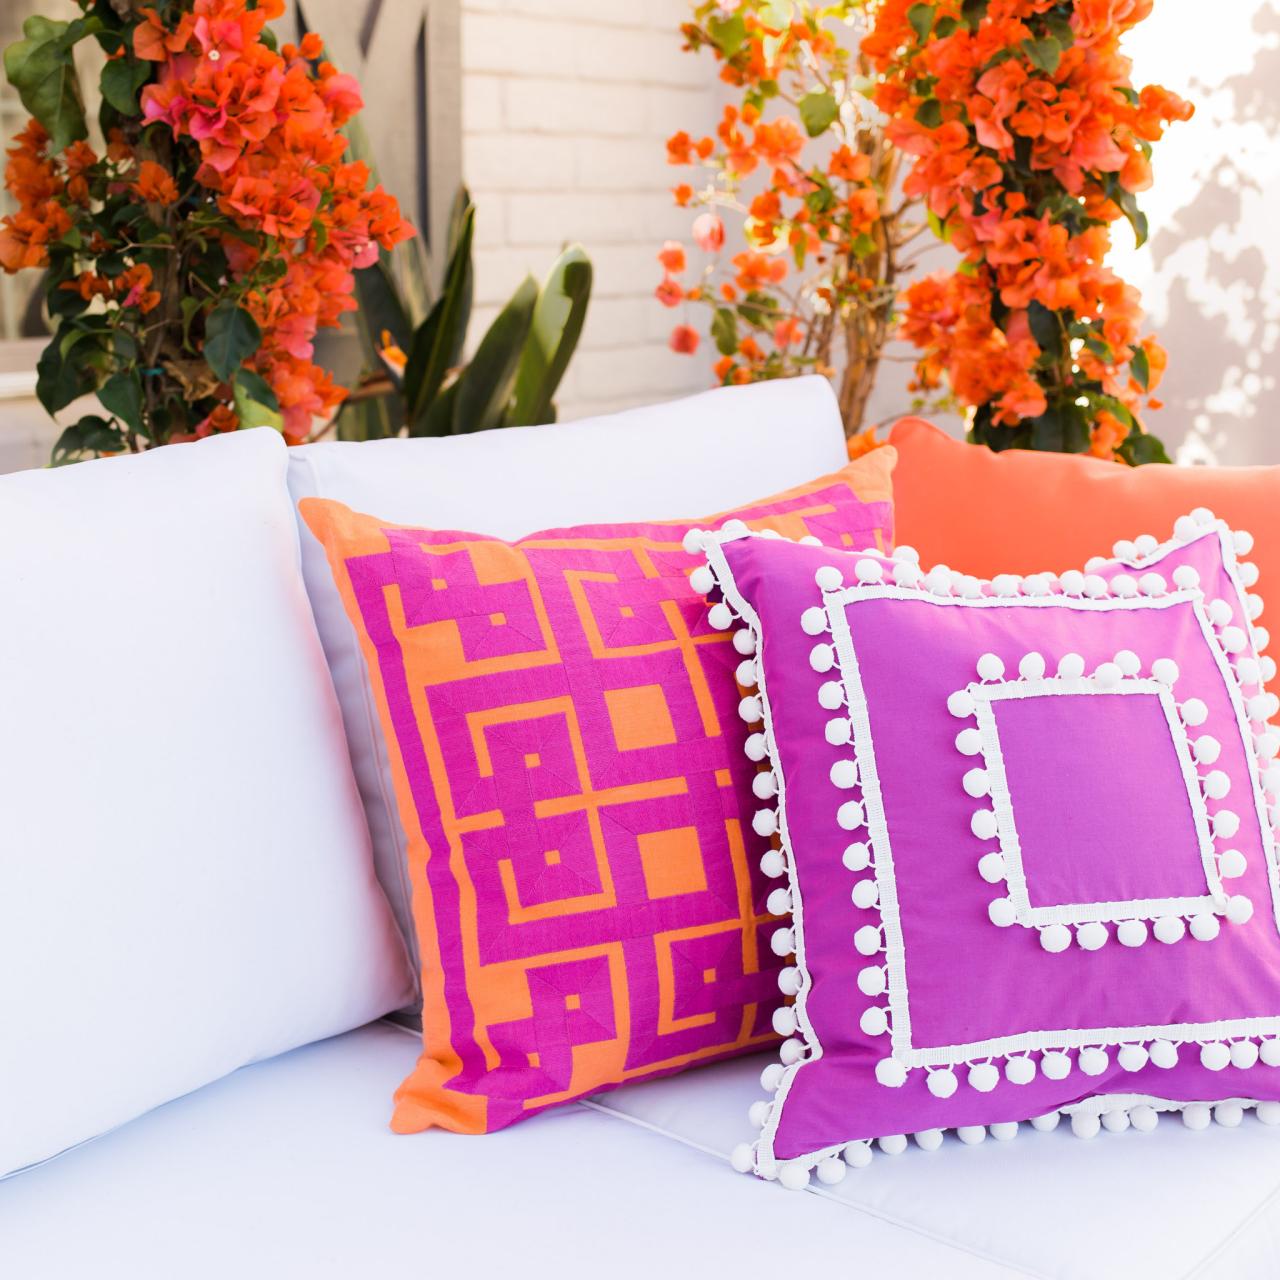 How To Make Outdoor Pillows